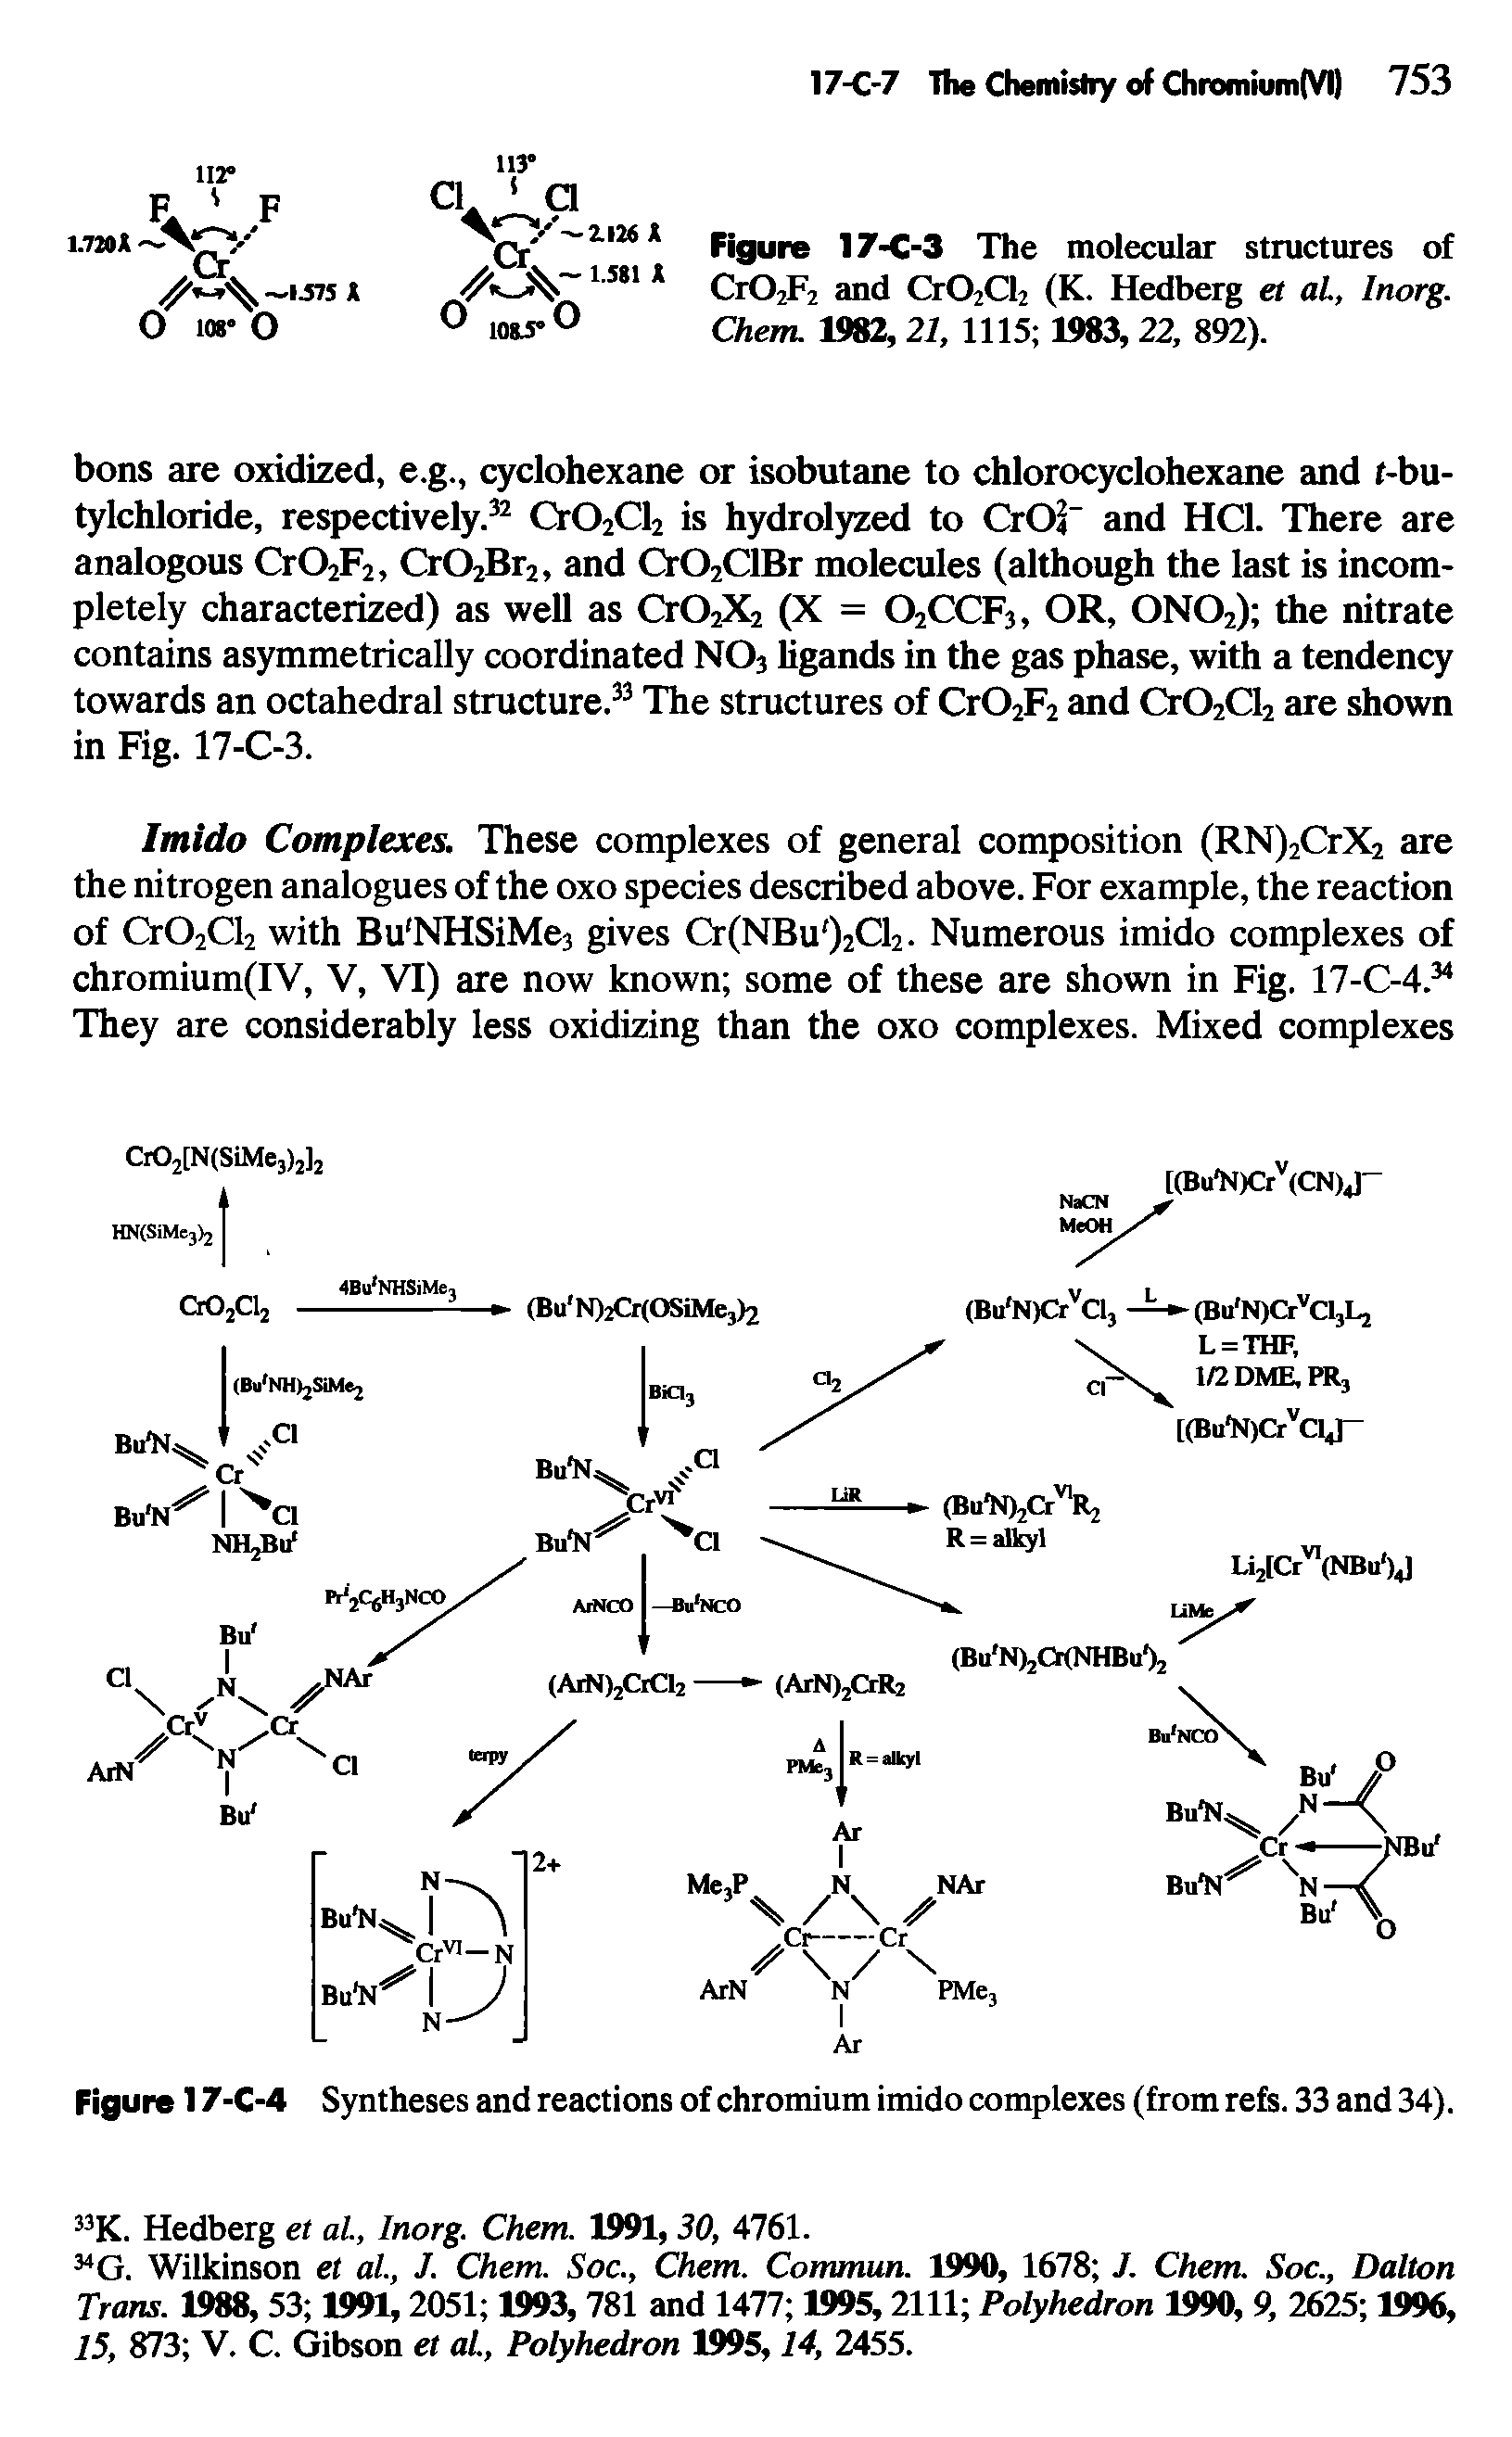 Figure 17-C-4 Syntheses and reactions of chromium imido complexes (from refs. 33 and 34).